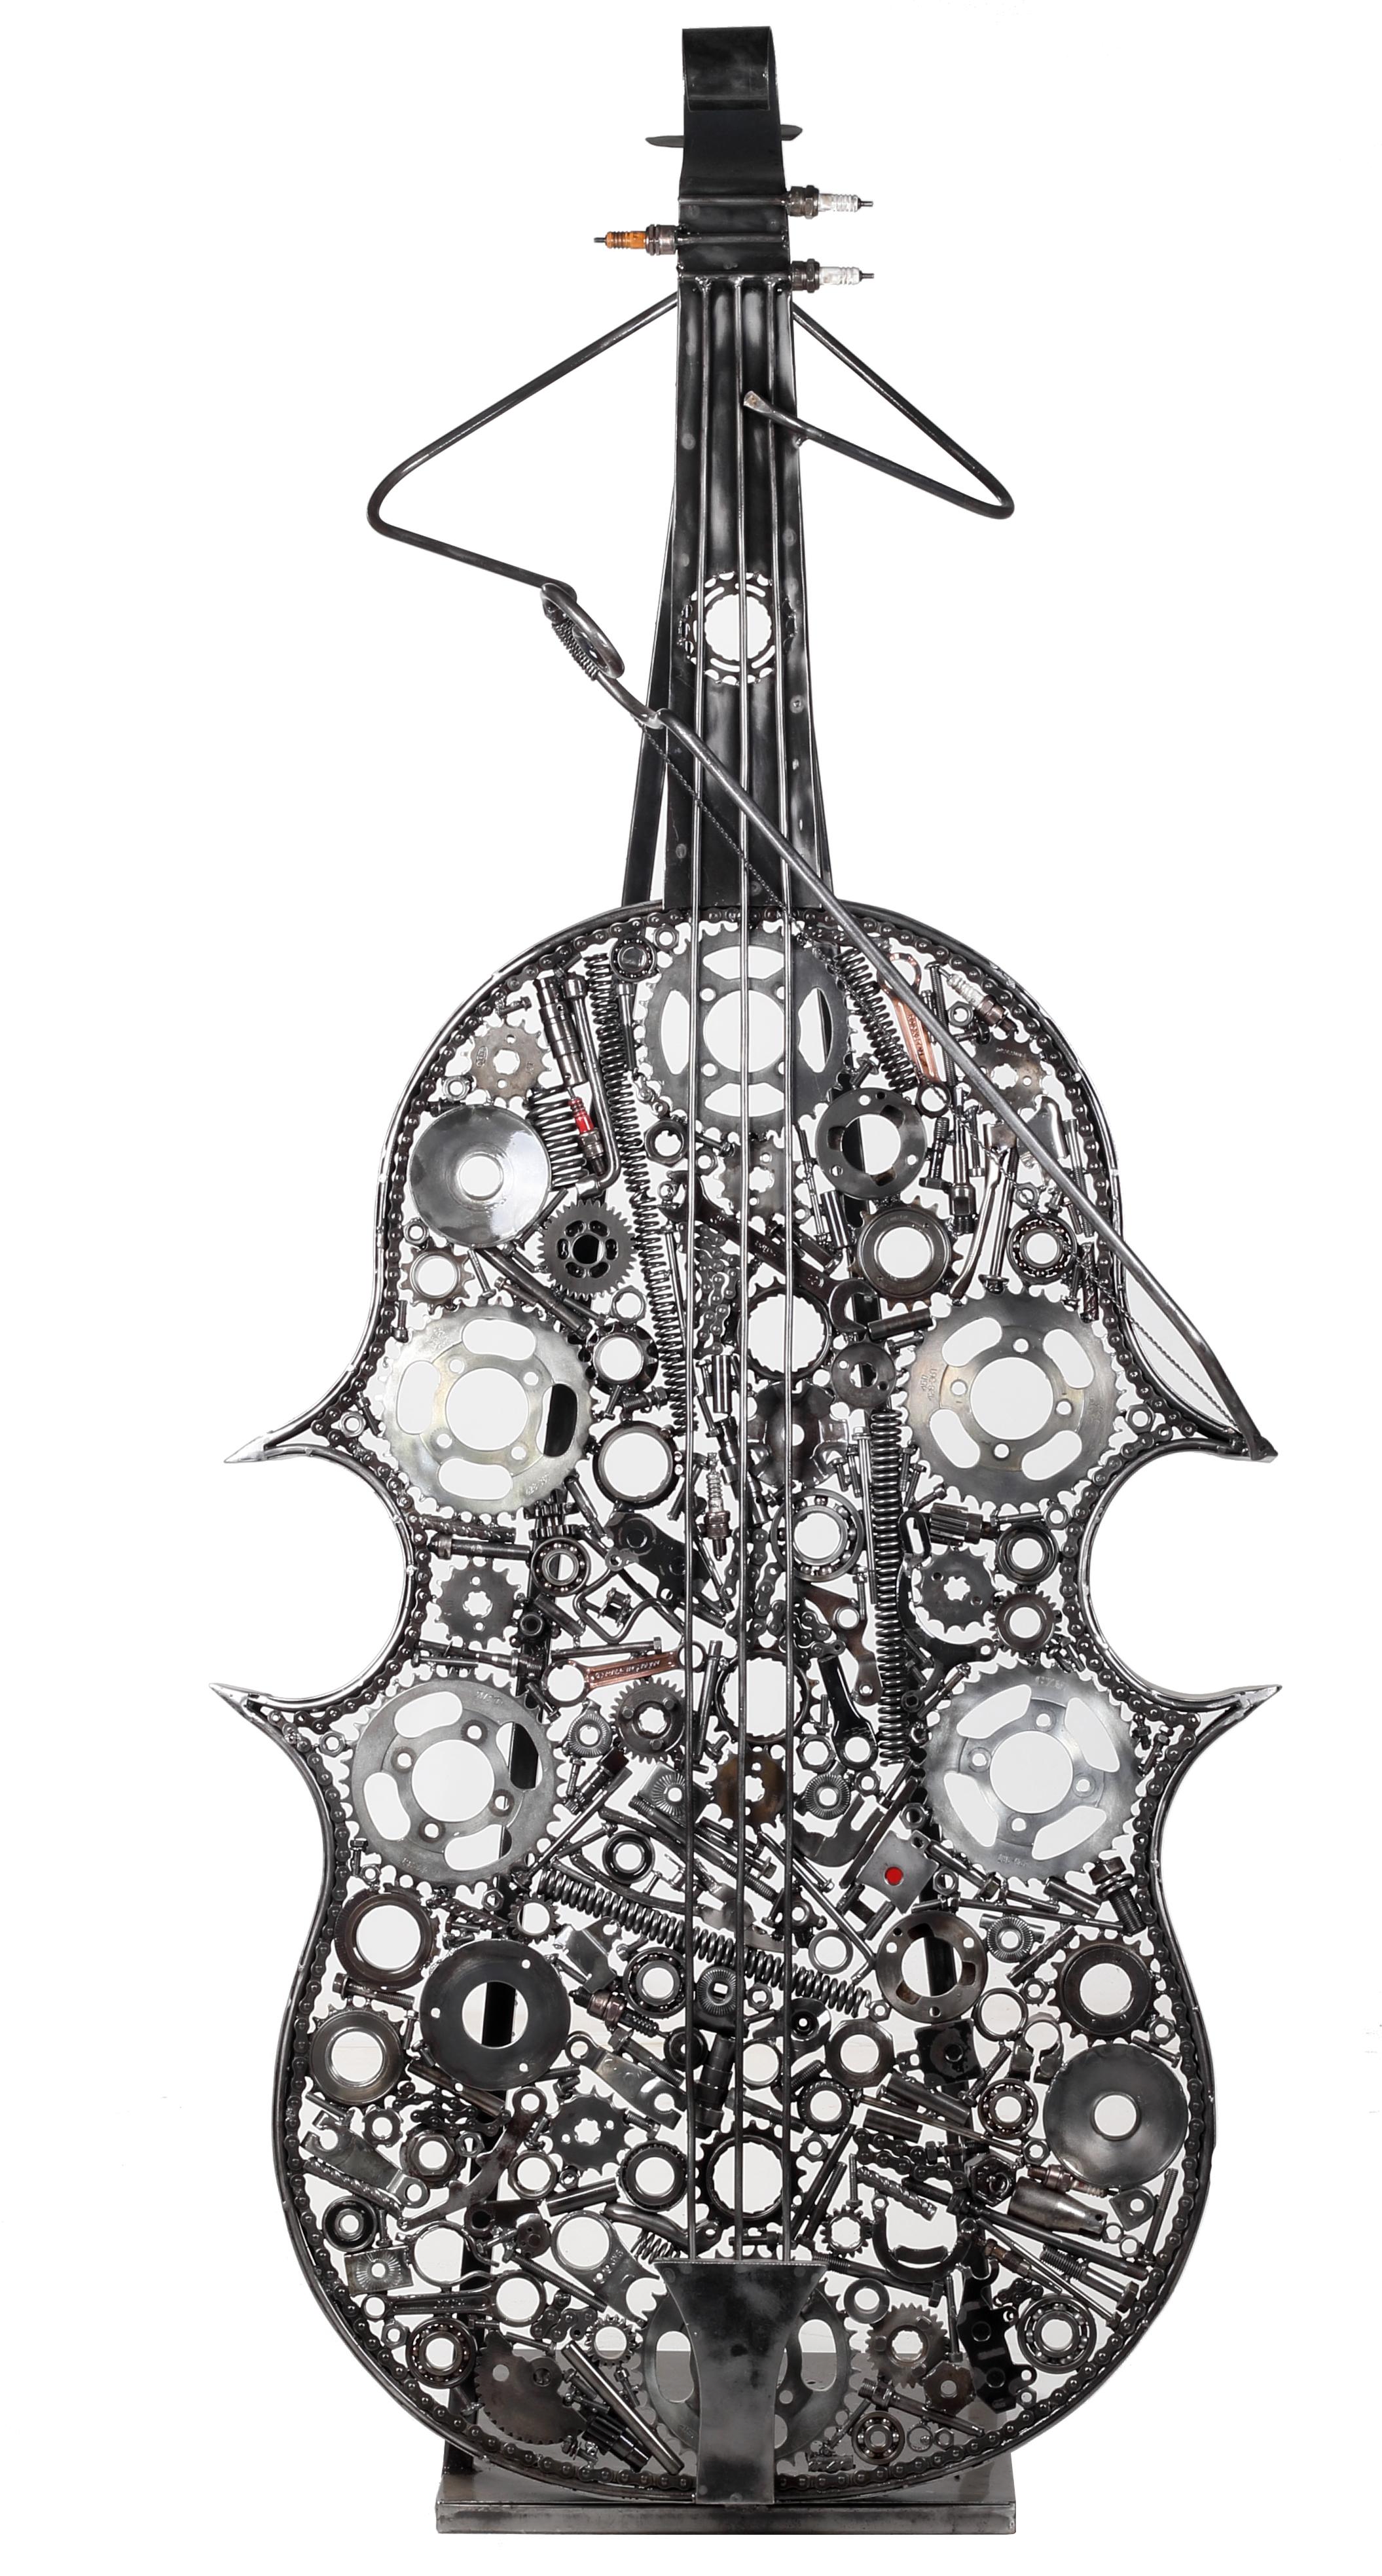 Iron cello sculpture made by hand with recycled motorcycle parts.